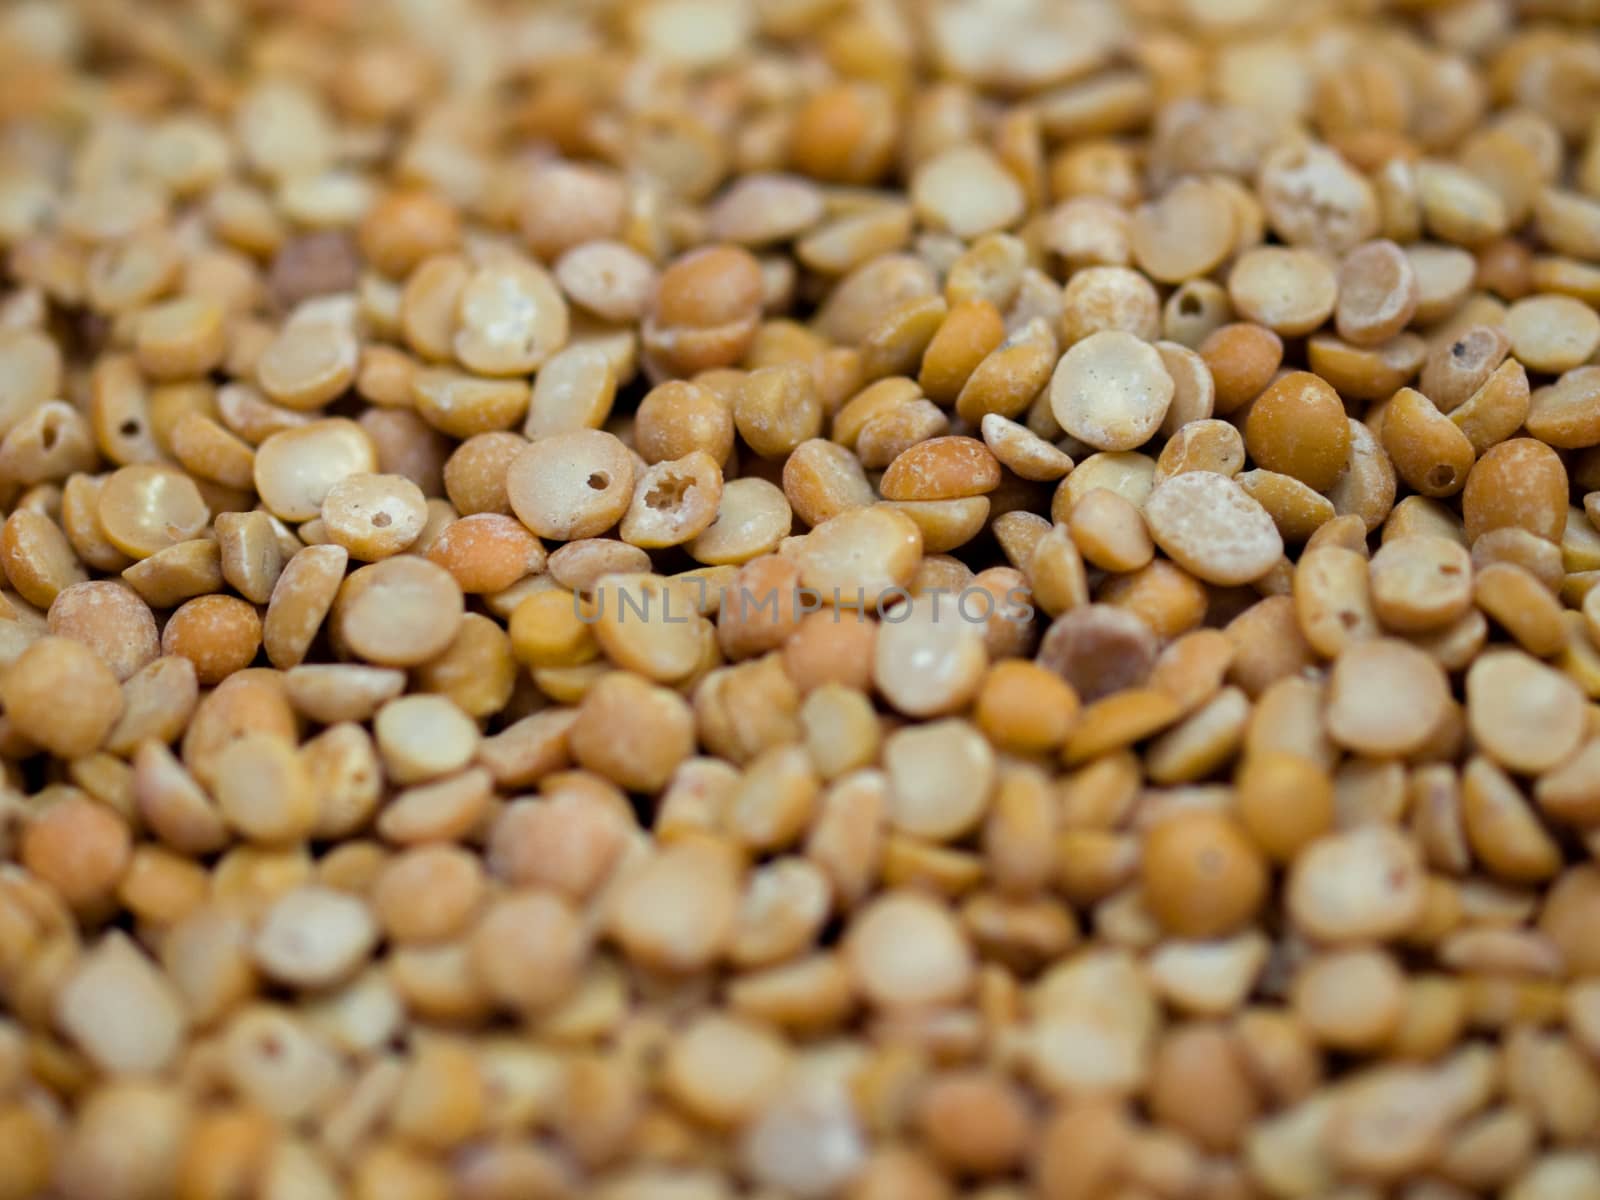 COLOR PHOTO OF CHICKPEA OR CHICK PEA (CICER ARIETINUM)